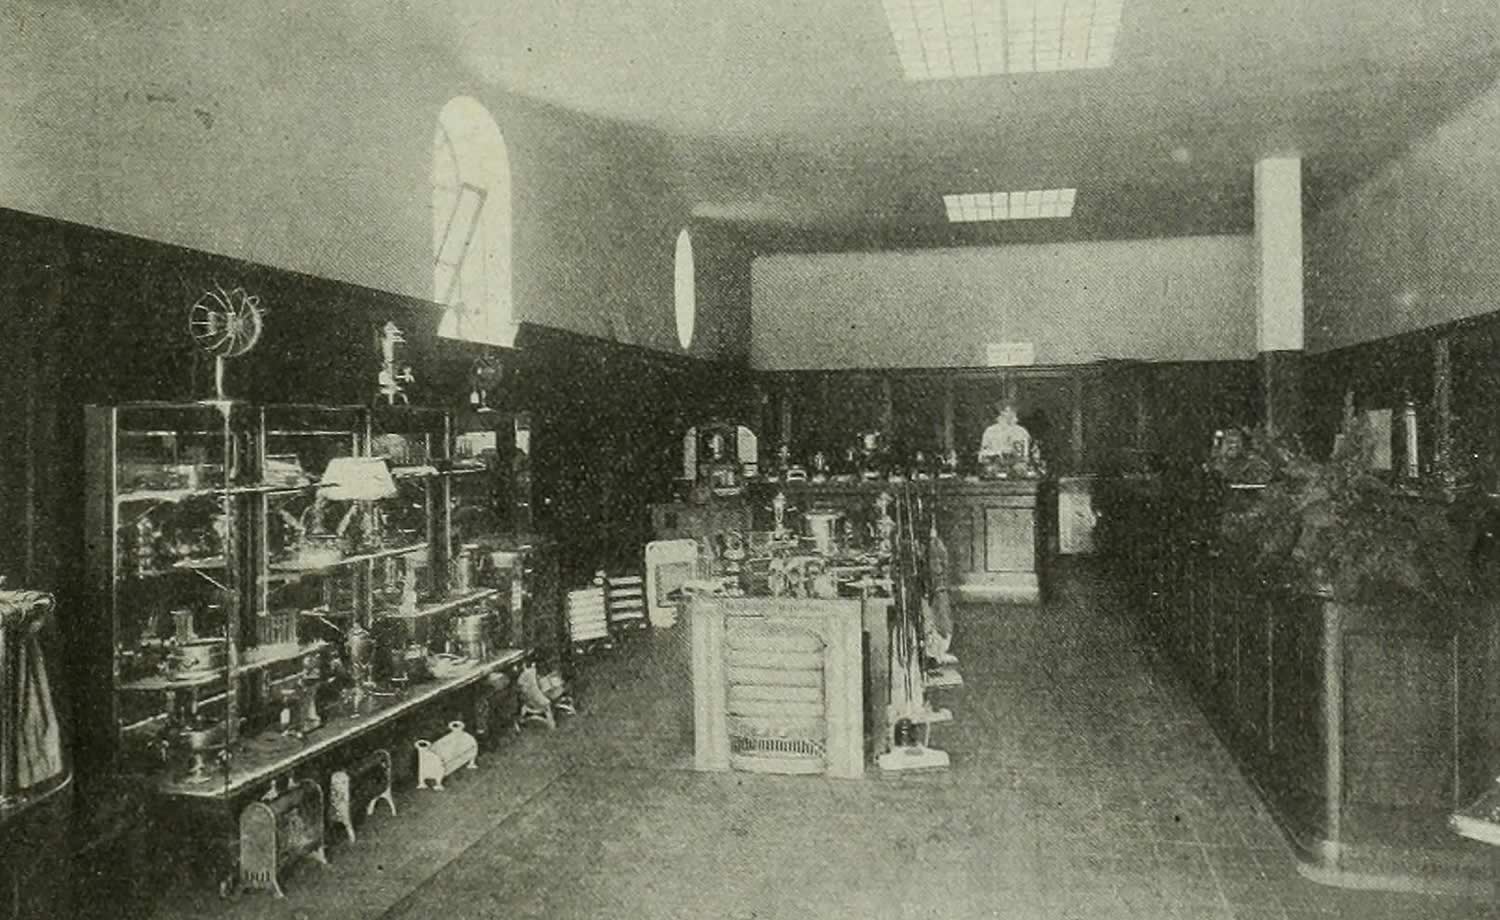 Black and white image of the interior of a store with early electrical domestic devices on display.